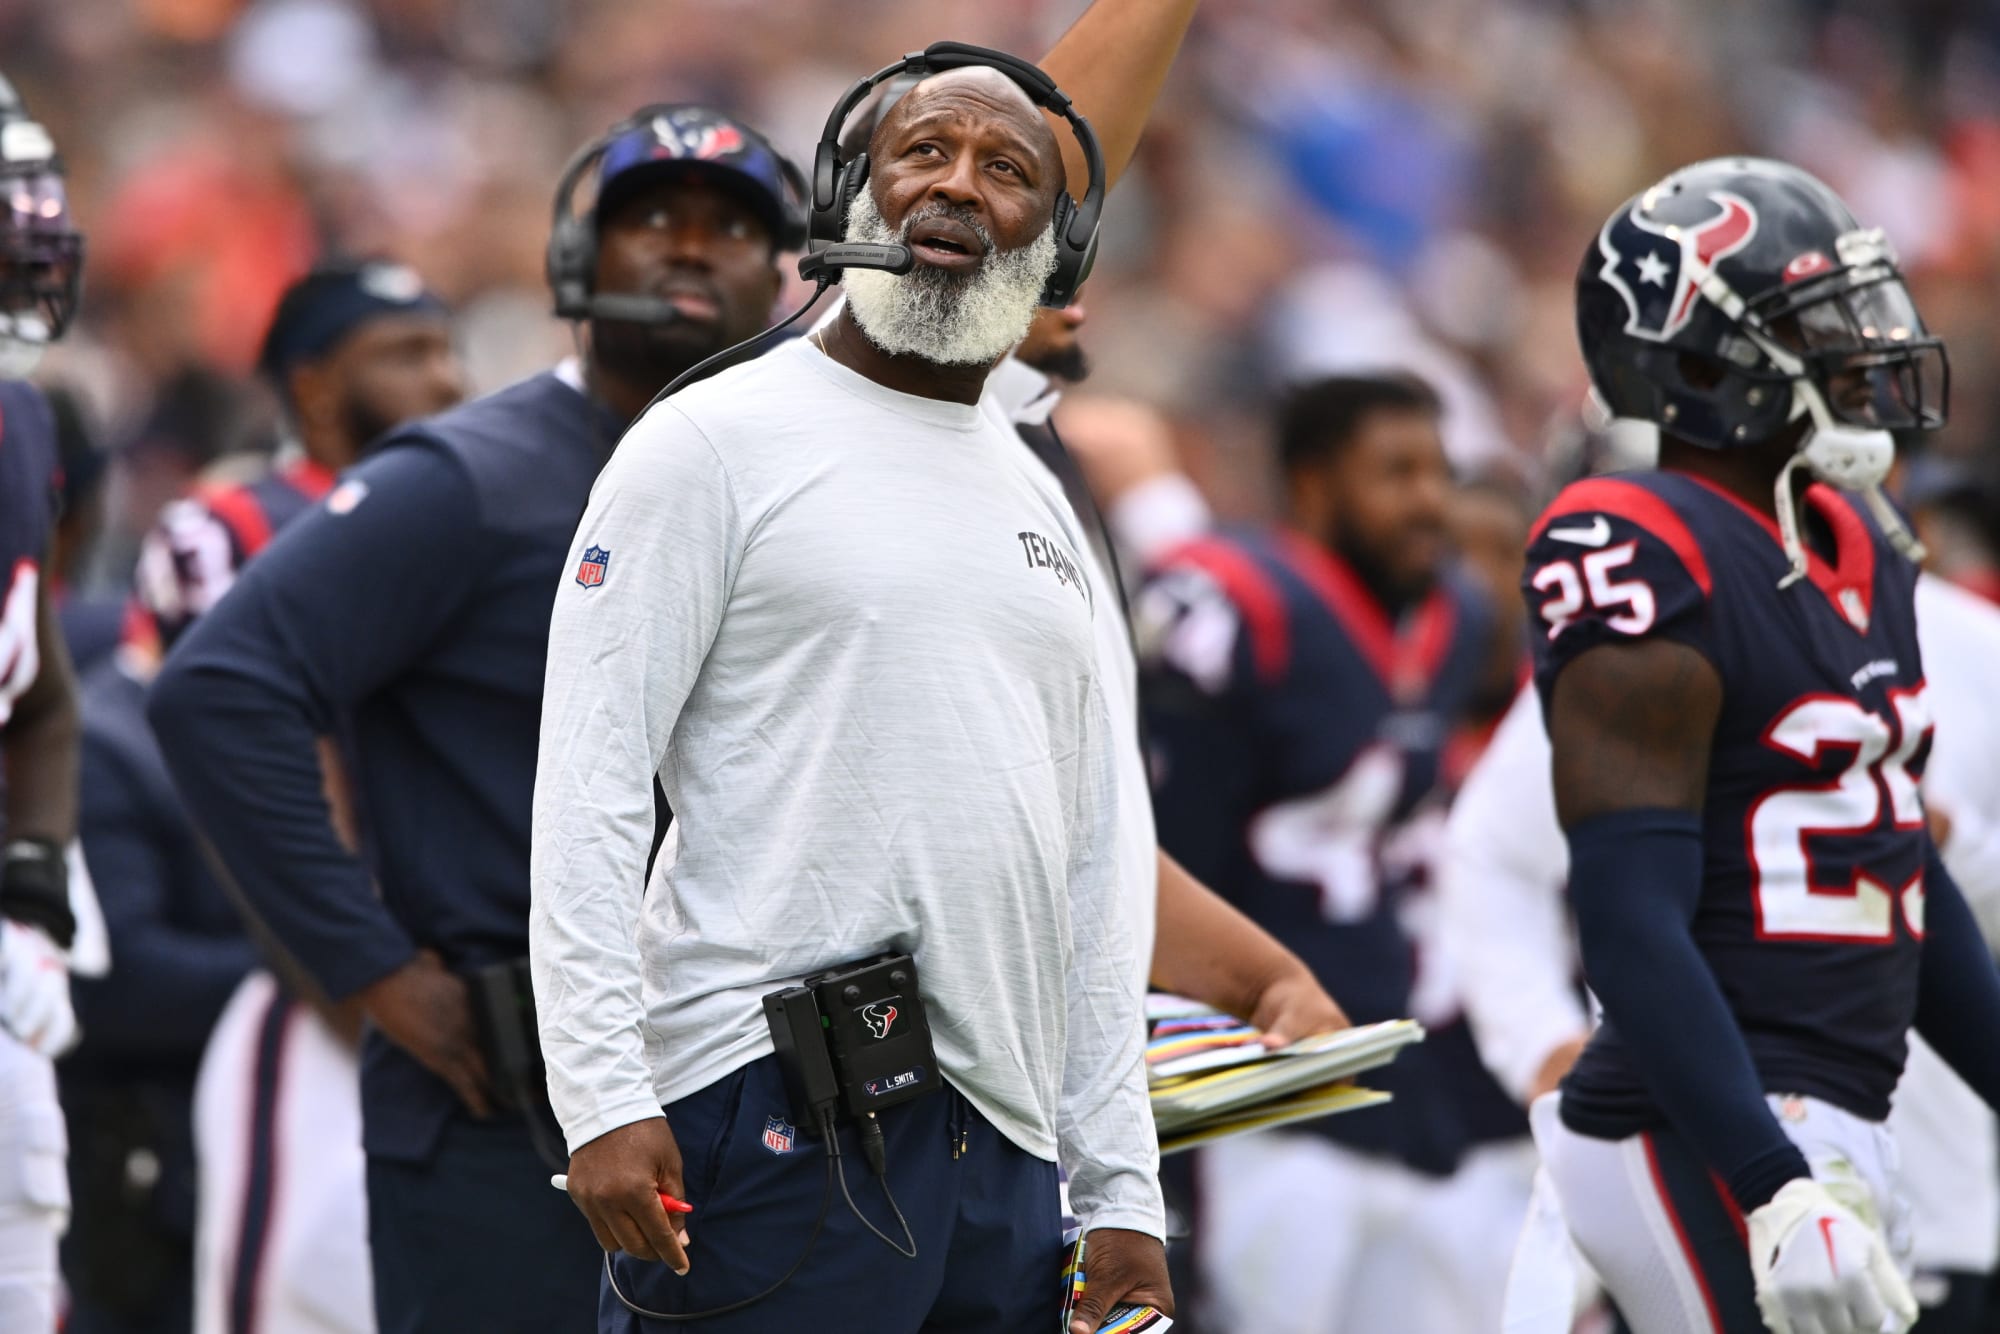 Are the Houston Texans' playoff hopes already gone?